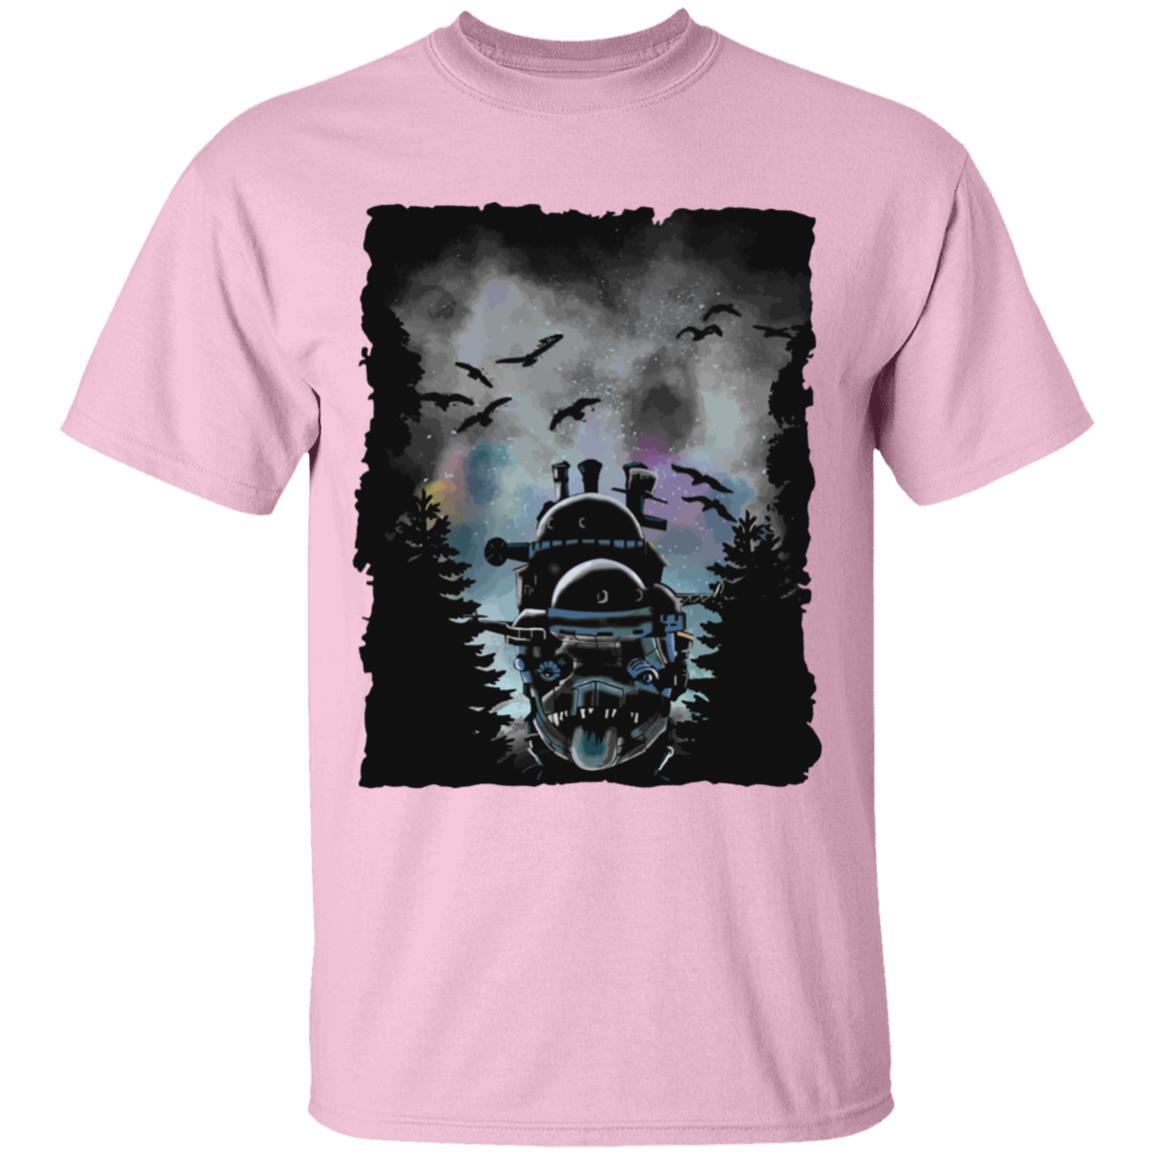 Howl’s Moving Castle At Night T Shirt